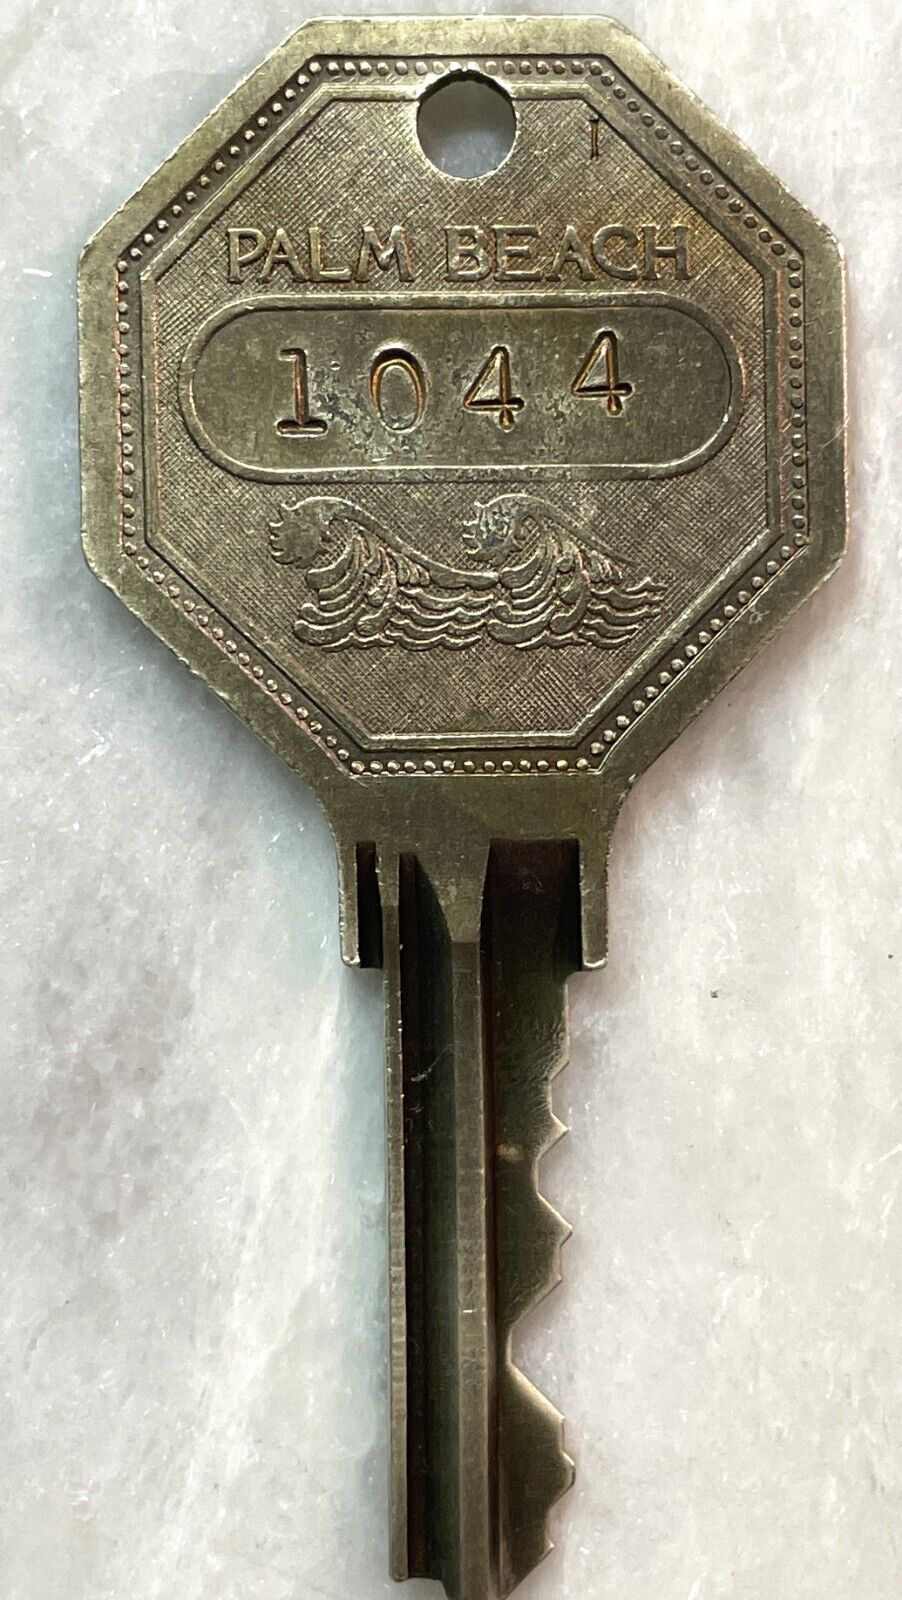 Vintage Key From The Breakers West Palm Beach Florida - Suite Key #1044